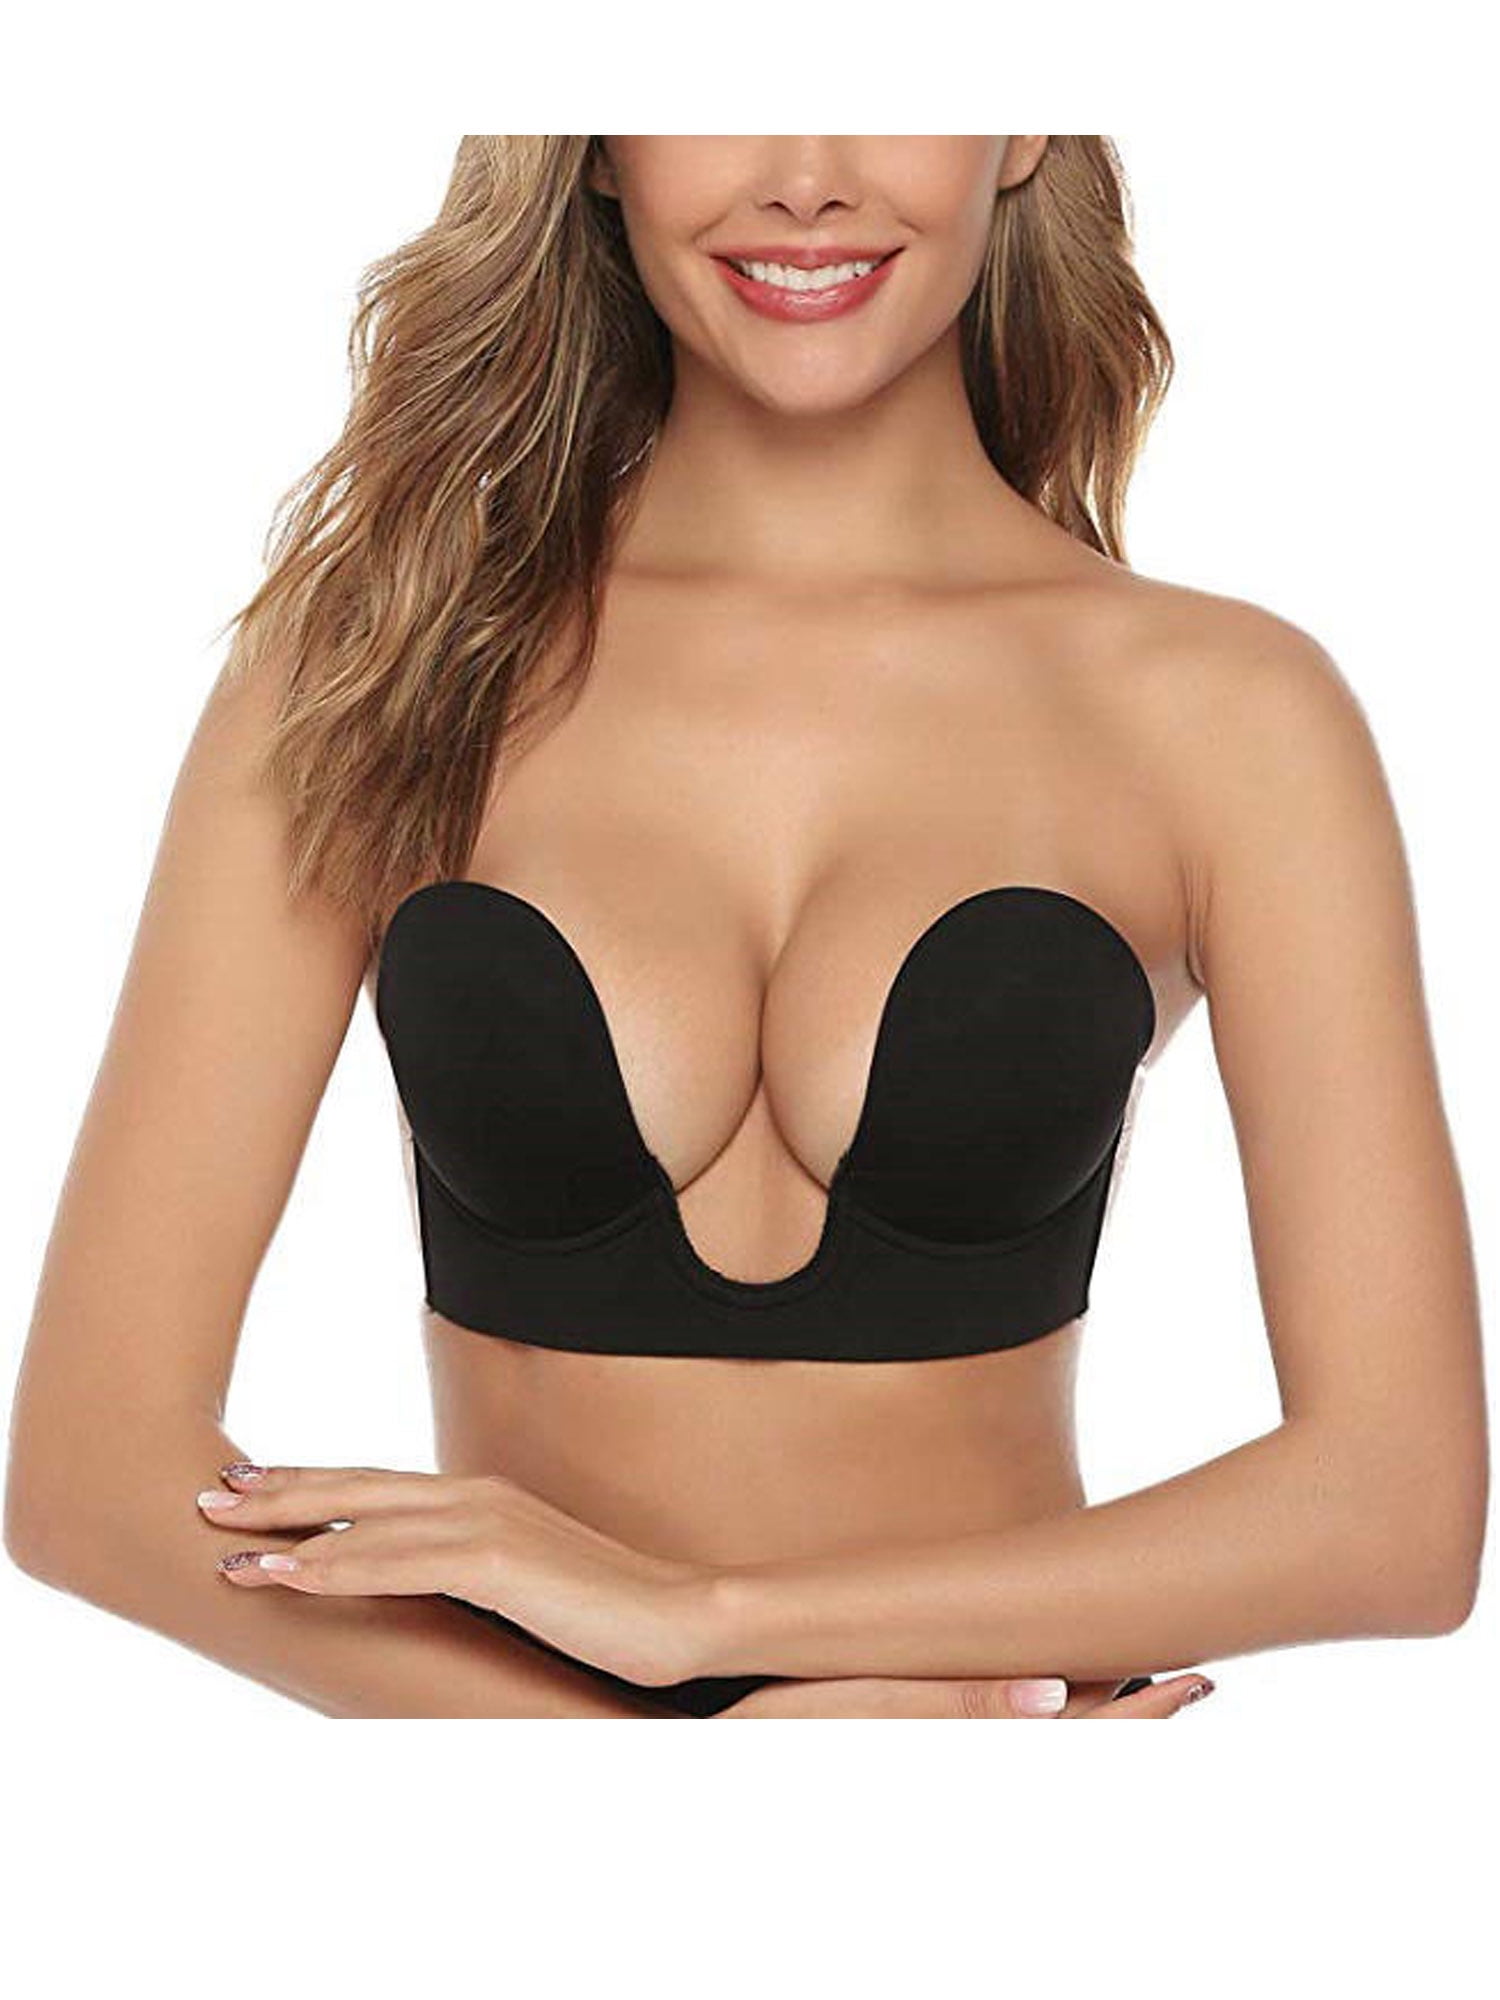 Adhesive Bra for Women Push Up, Premium Silicone Bra Tape Breast Lift  Pasties Sticky Bra M/L/XL Cup